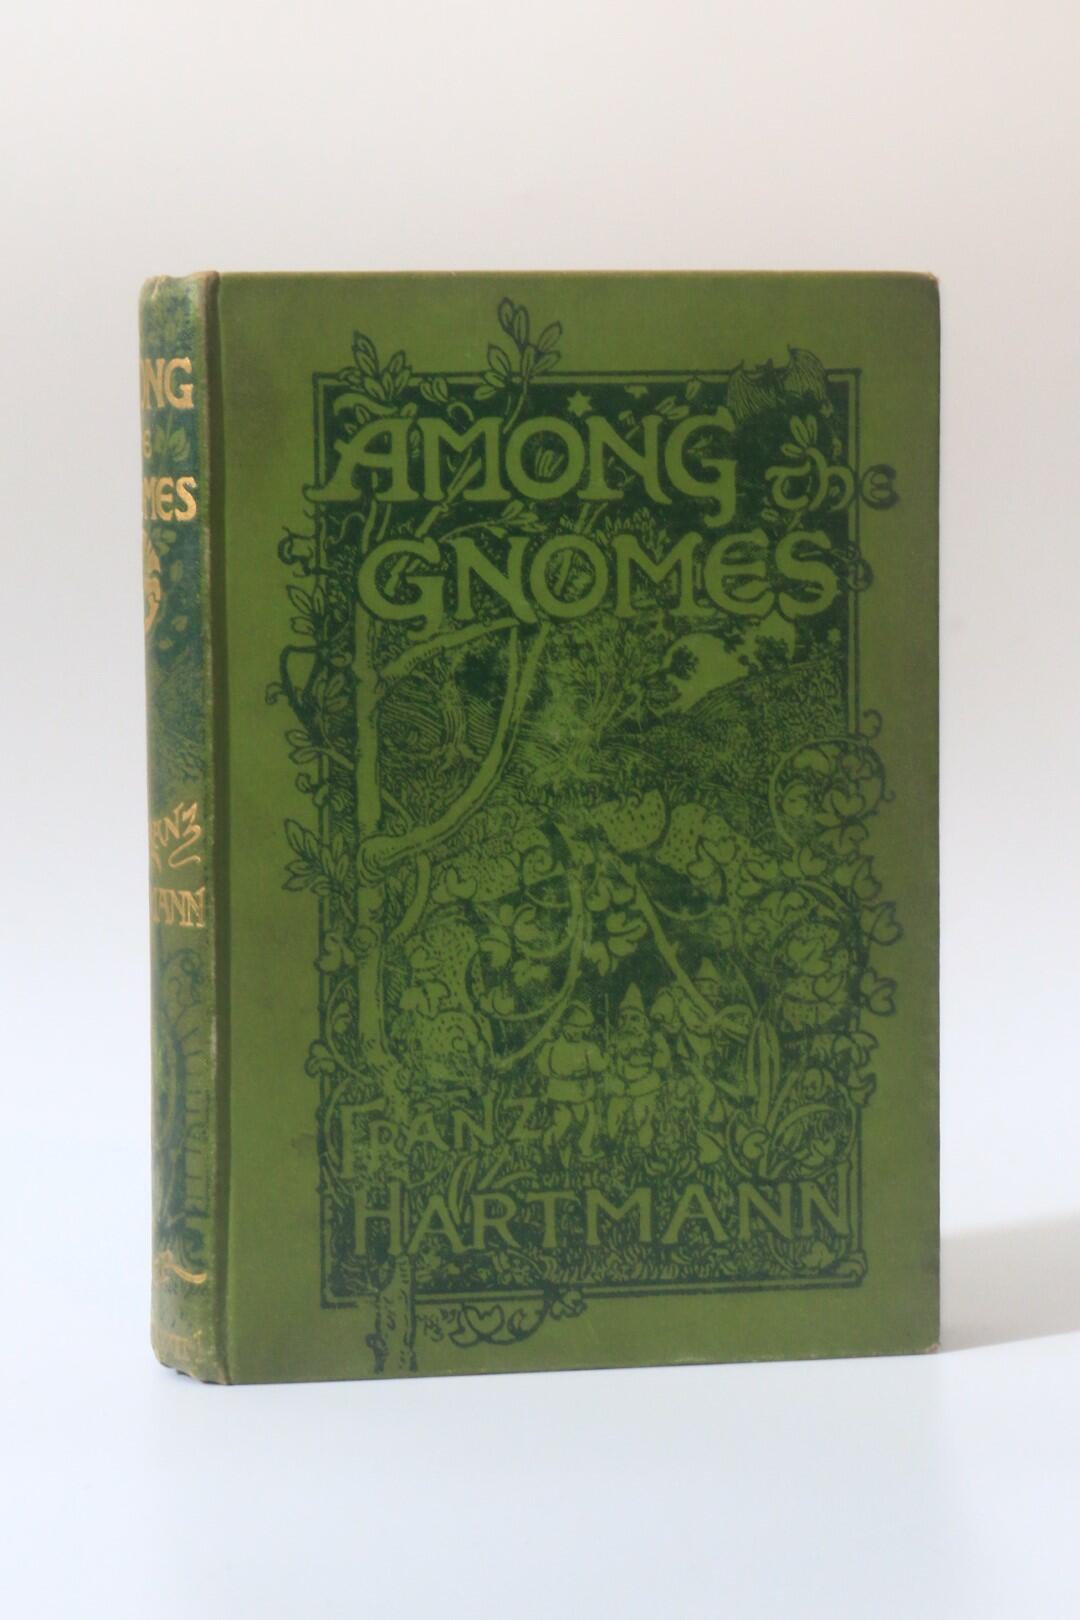 Franz Hartmann - Among the Gnomes: An Occult Tale of Adventure in the Untersberg - T. Fisher Unwin, 1895, First Edition.